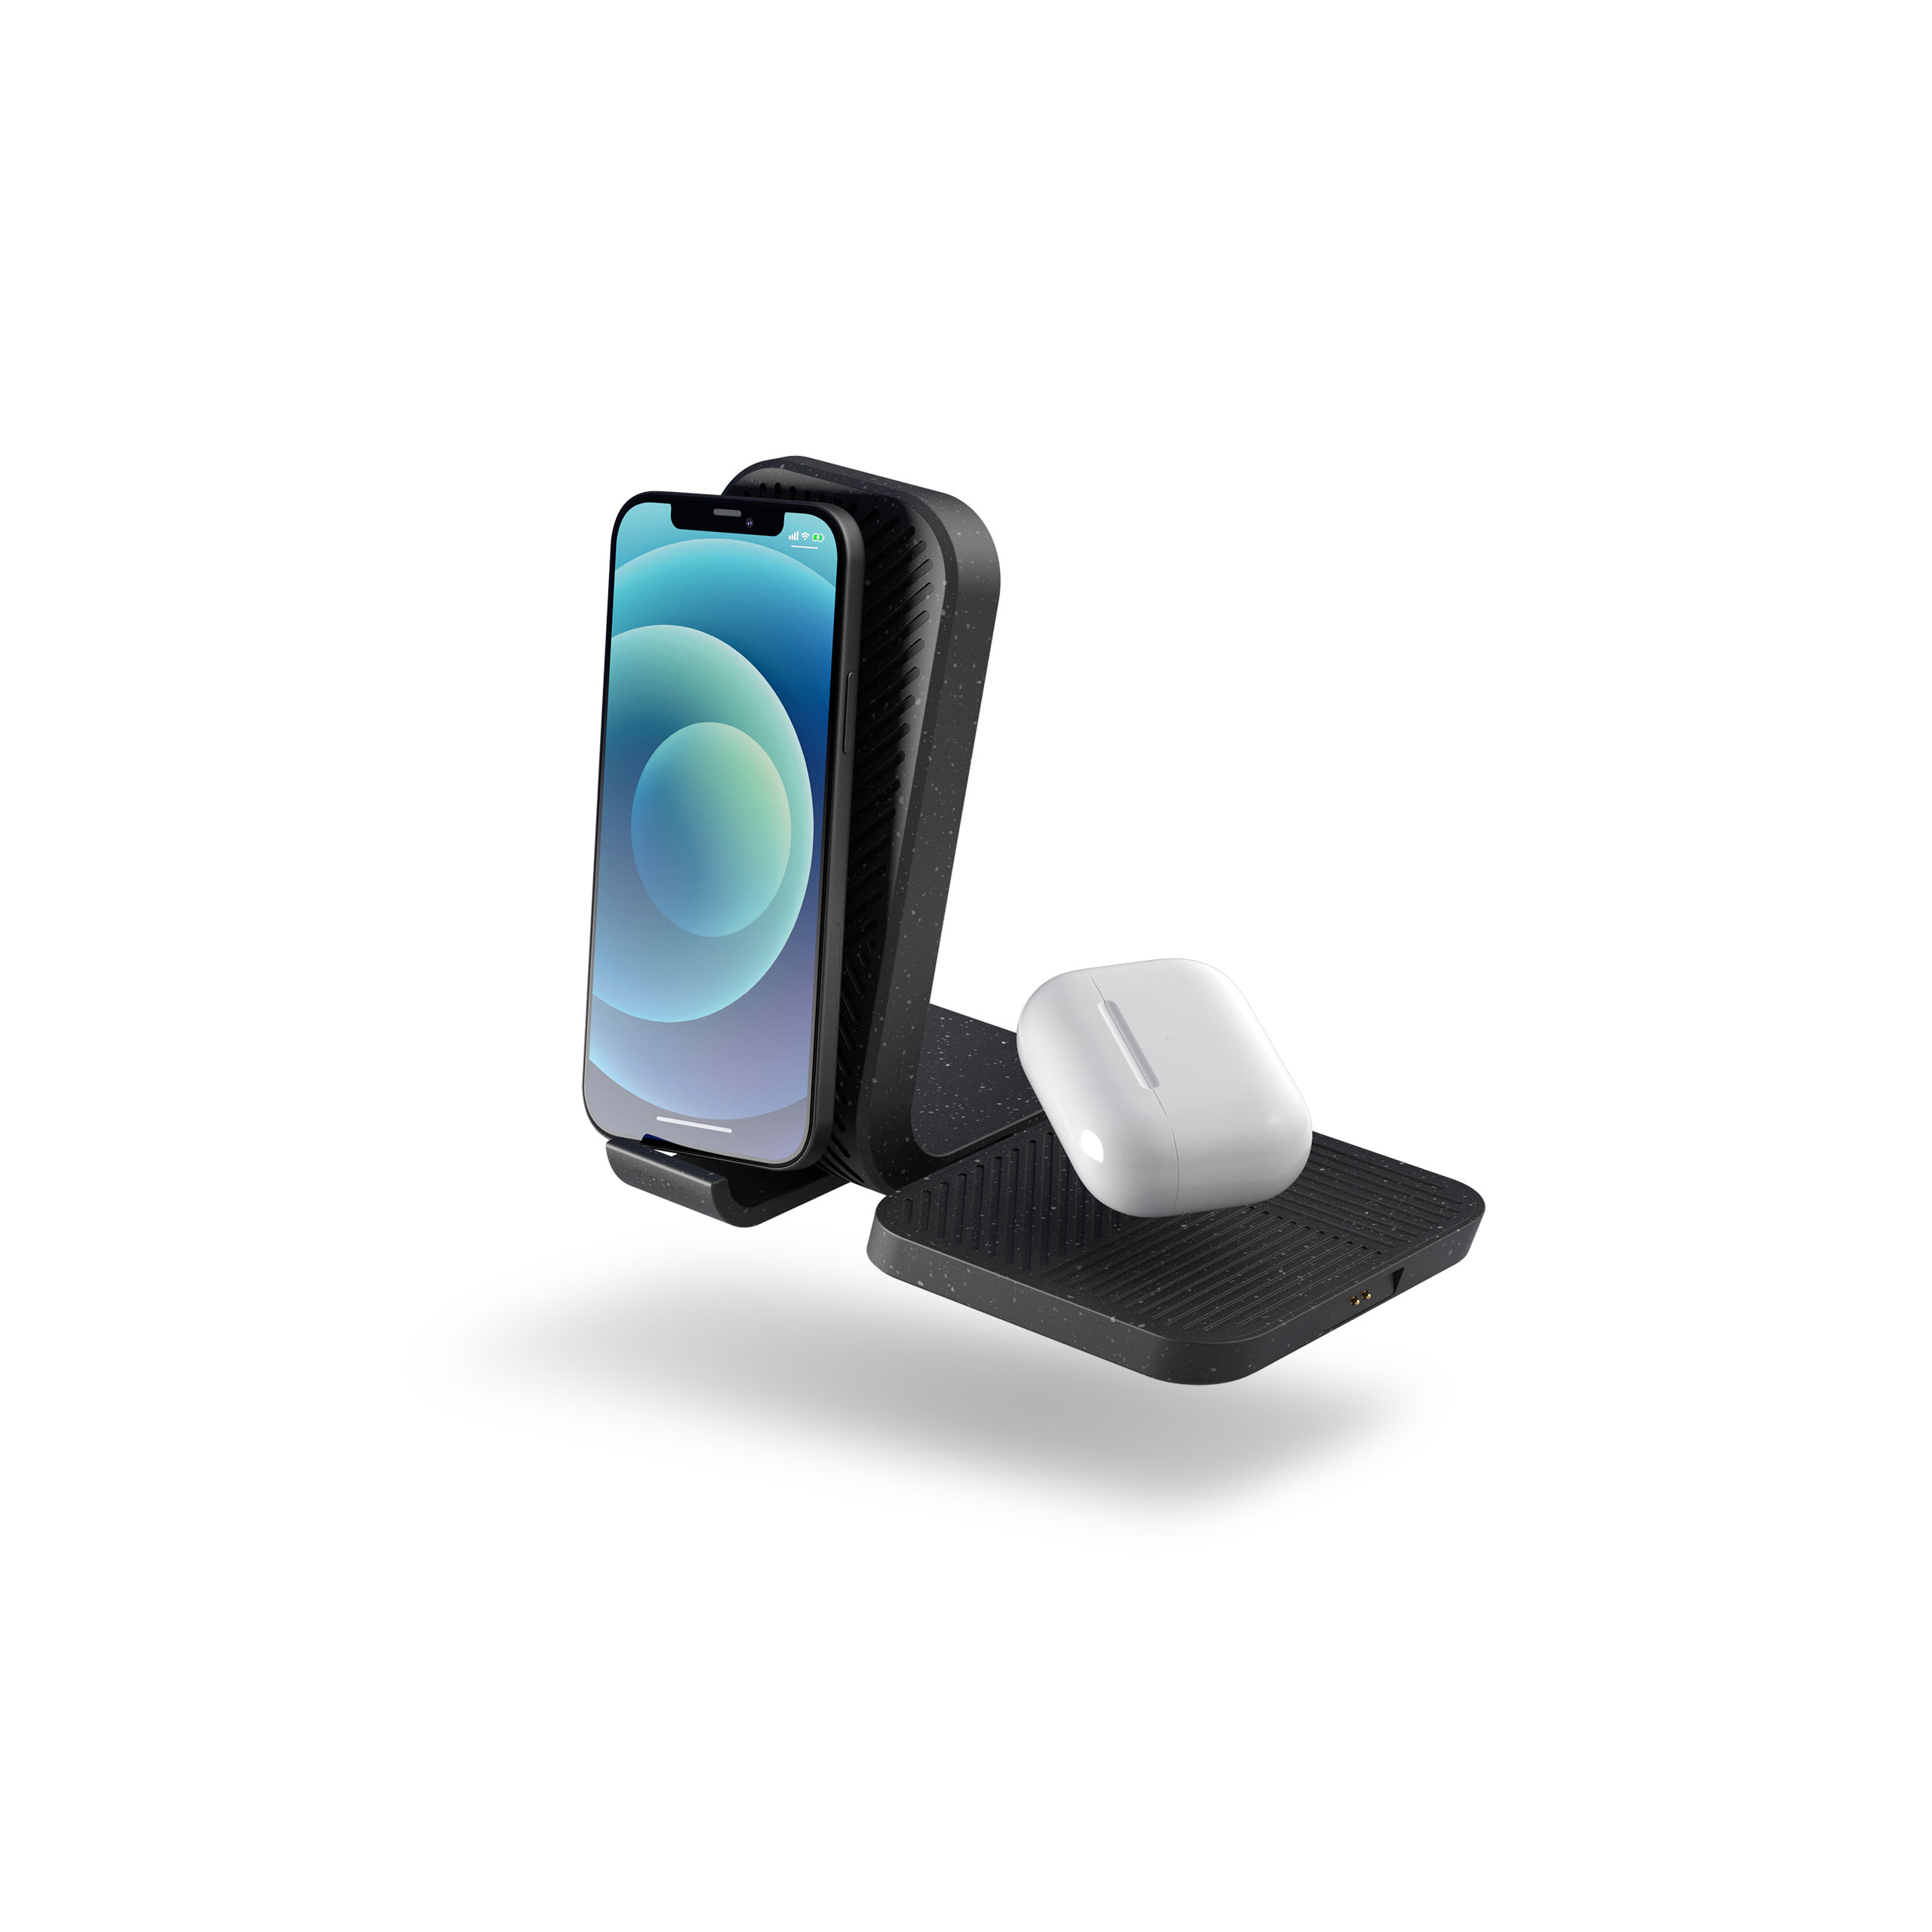 ZEMSC2P - Zens Modular Stand Wireless Charger With Extensions And Devices